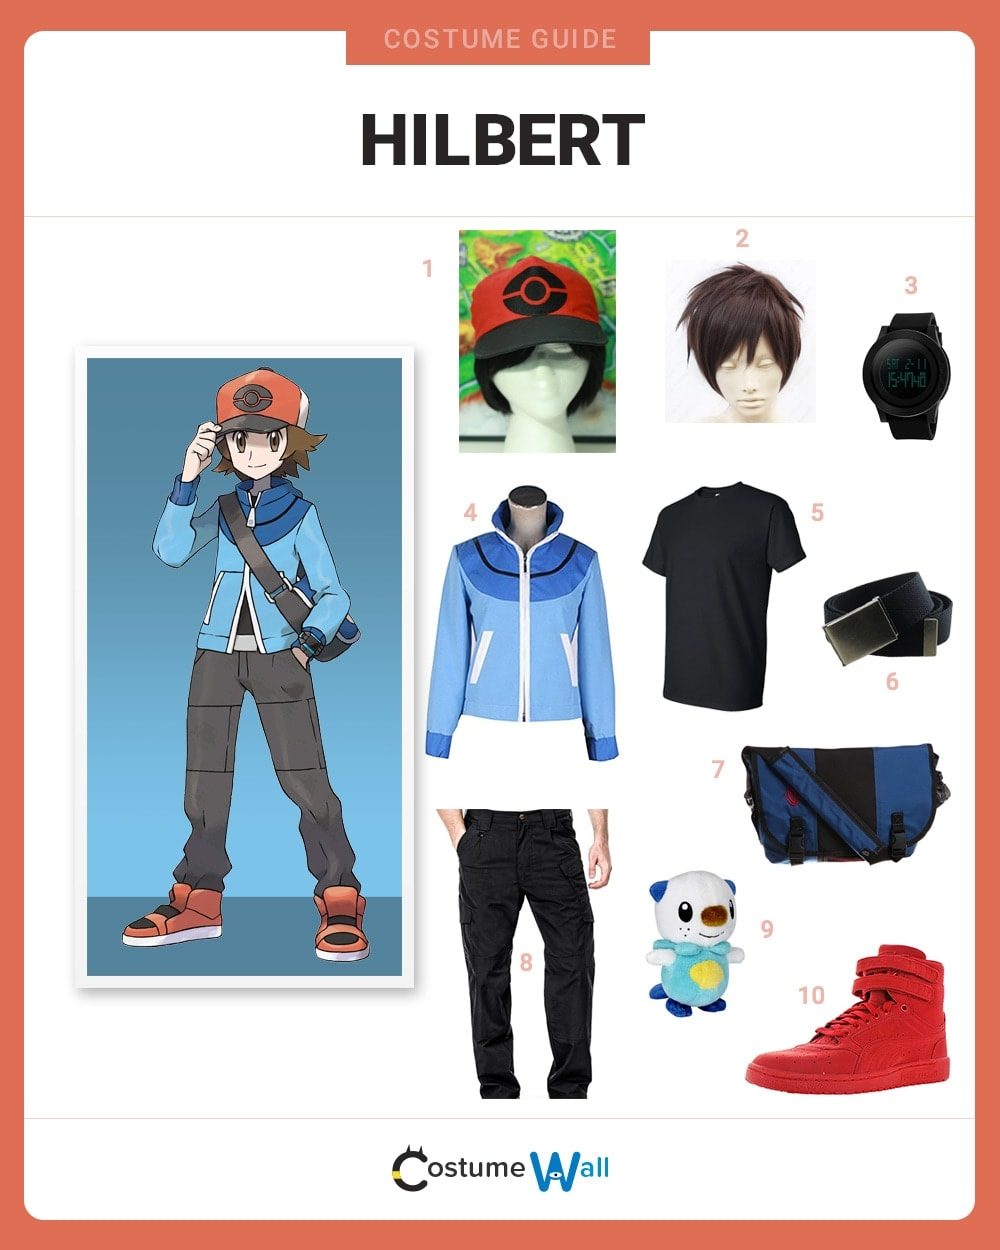 dress like hilbert costume | halloween and cosplay guides